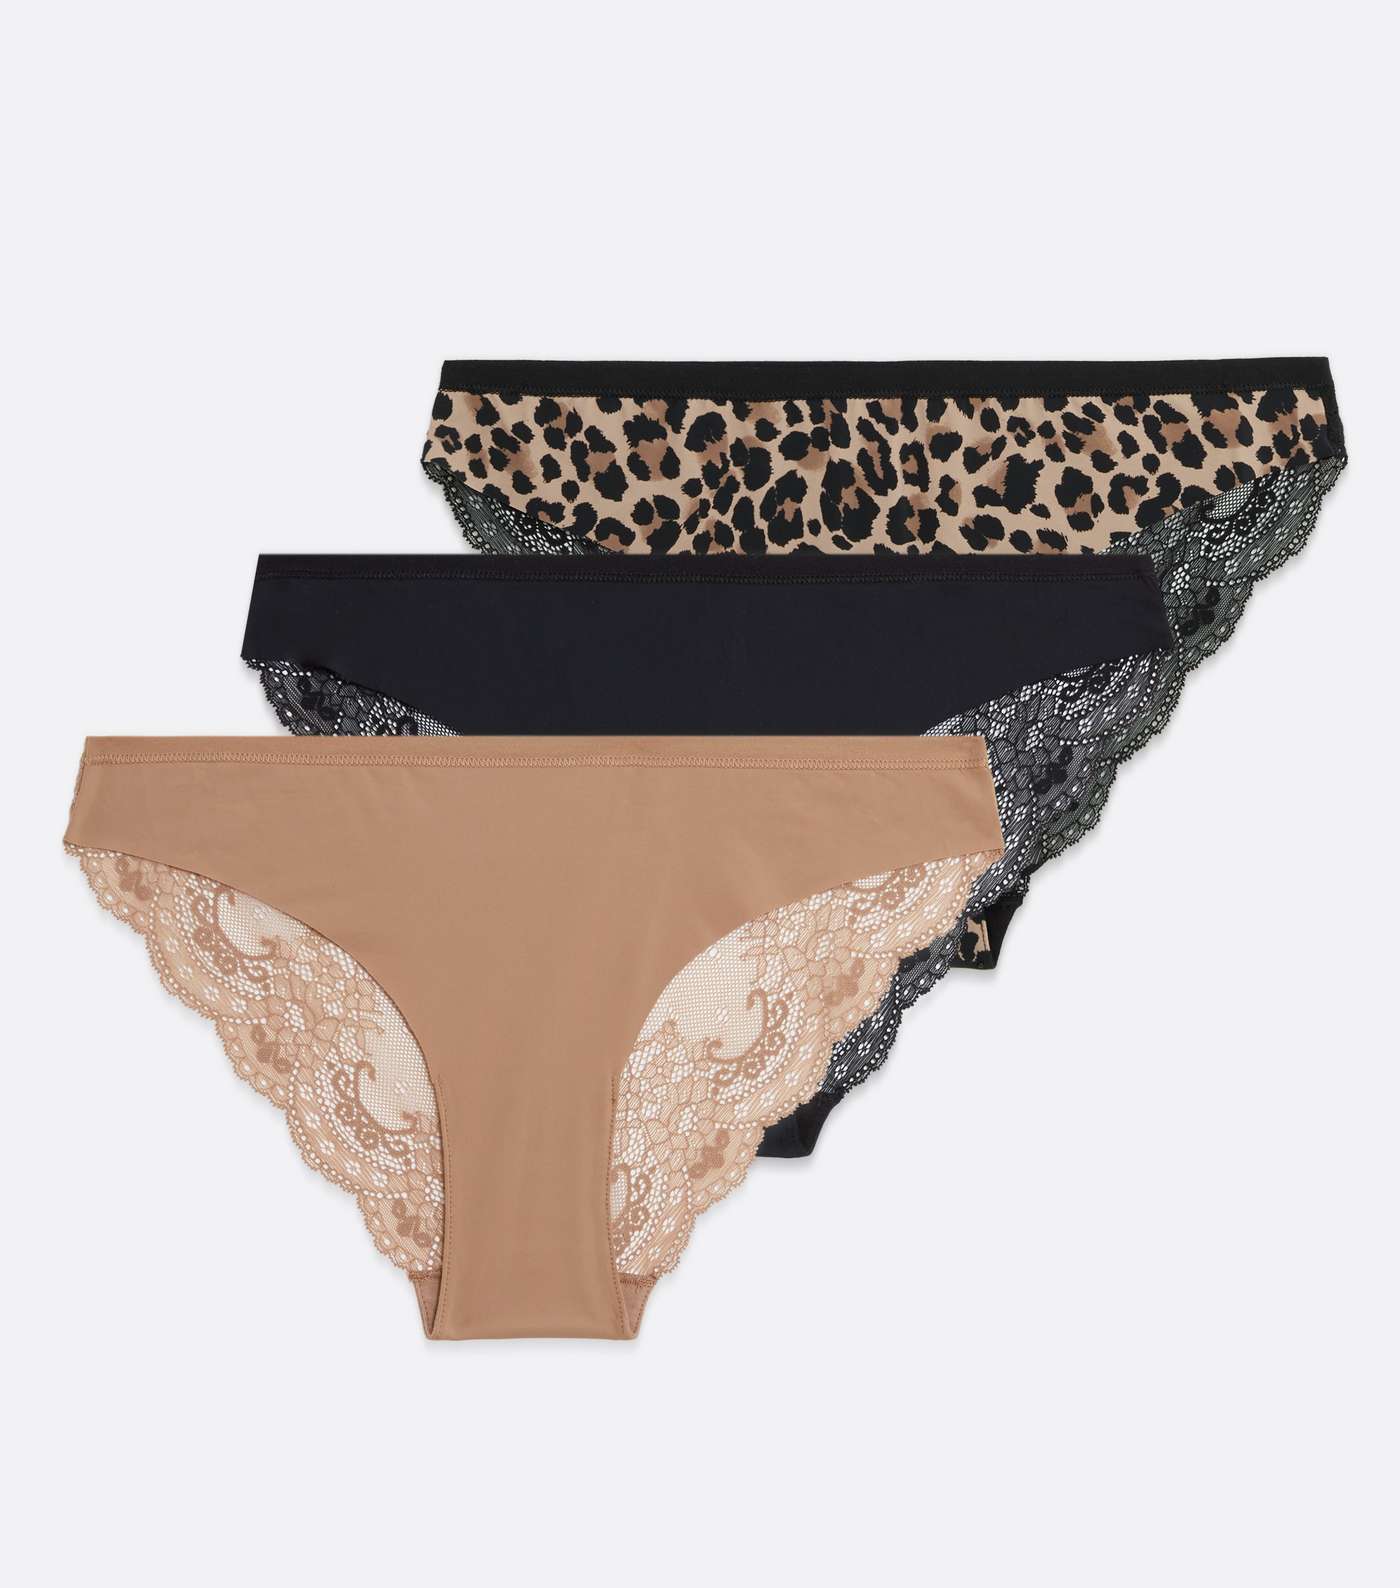 3 Pack Tan Black and Leopard Print Lace Seamless Brazilian Briefs Image 5